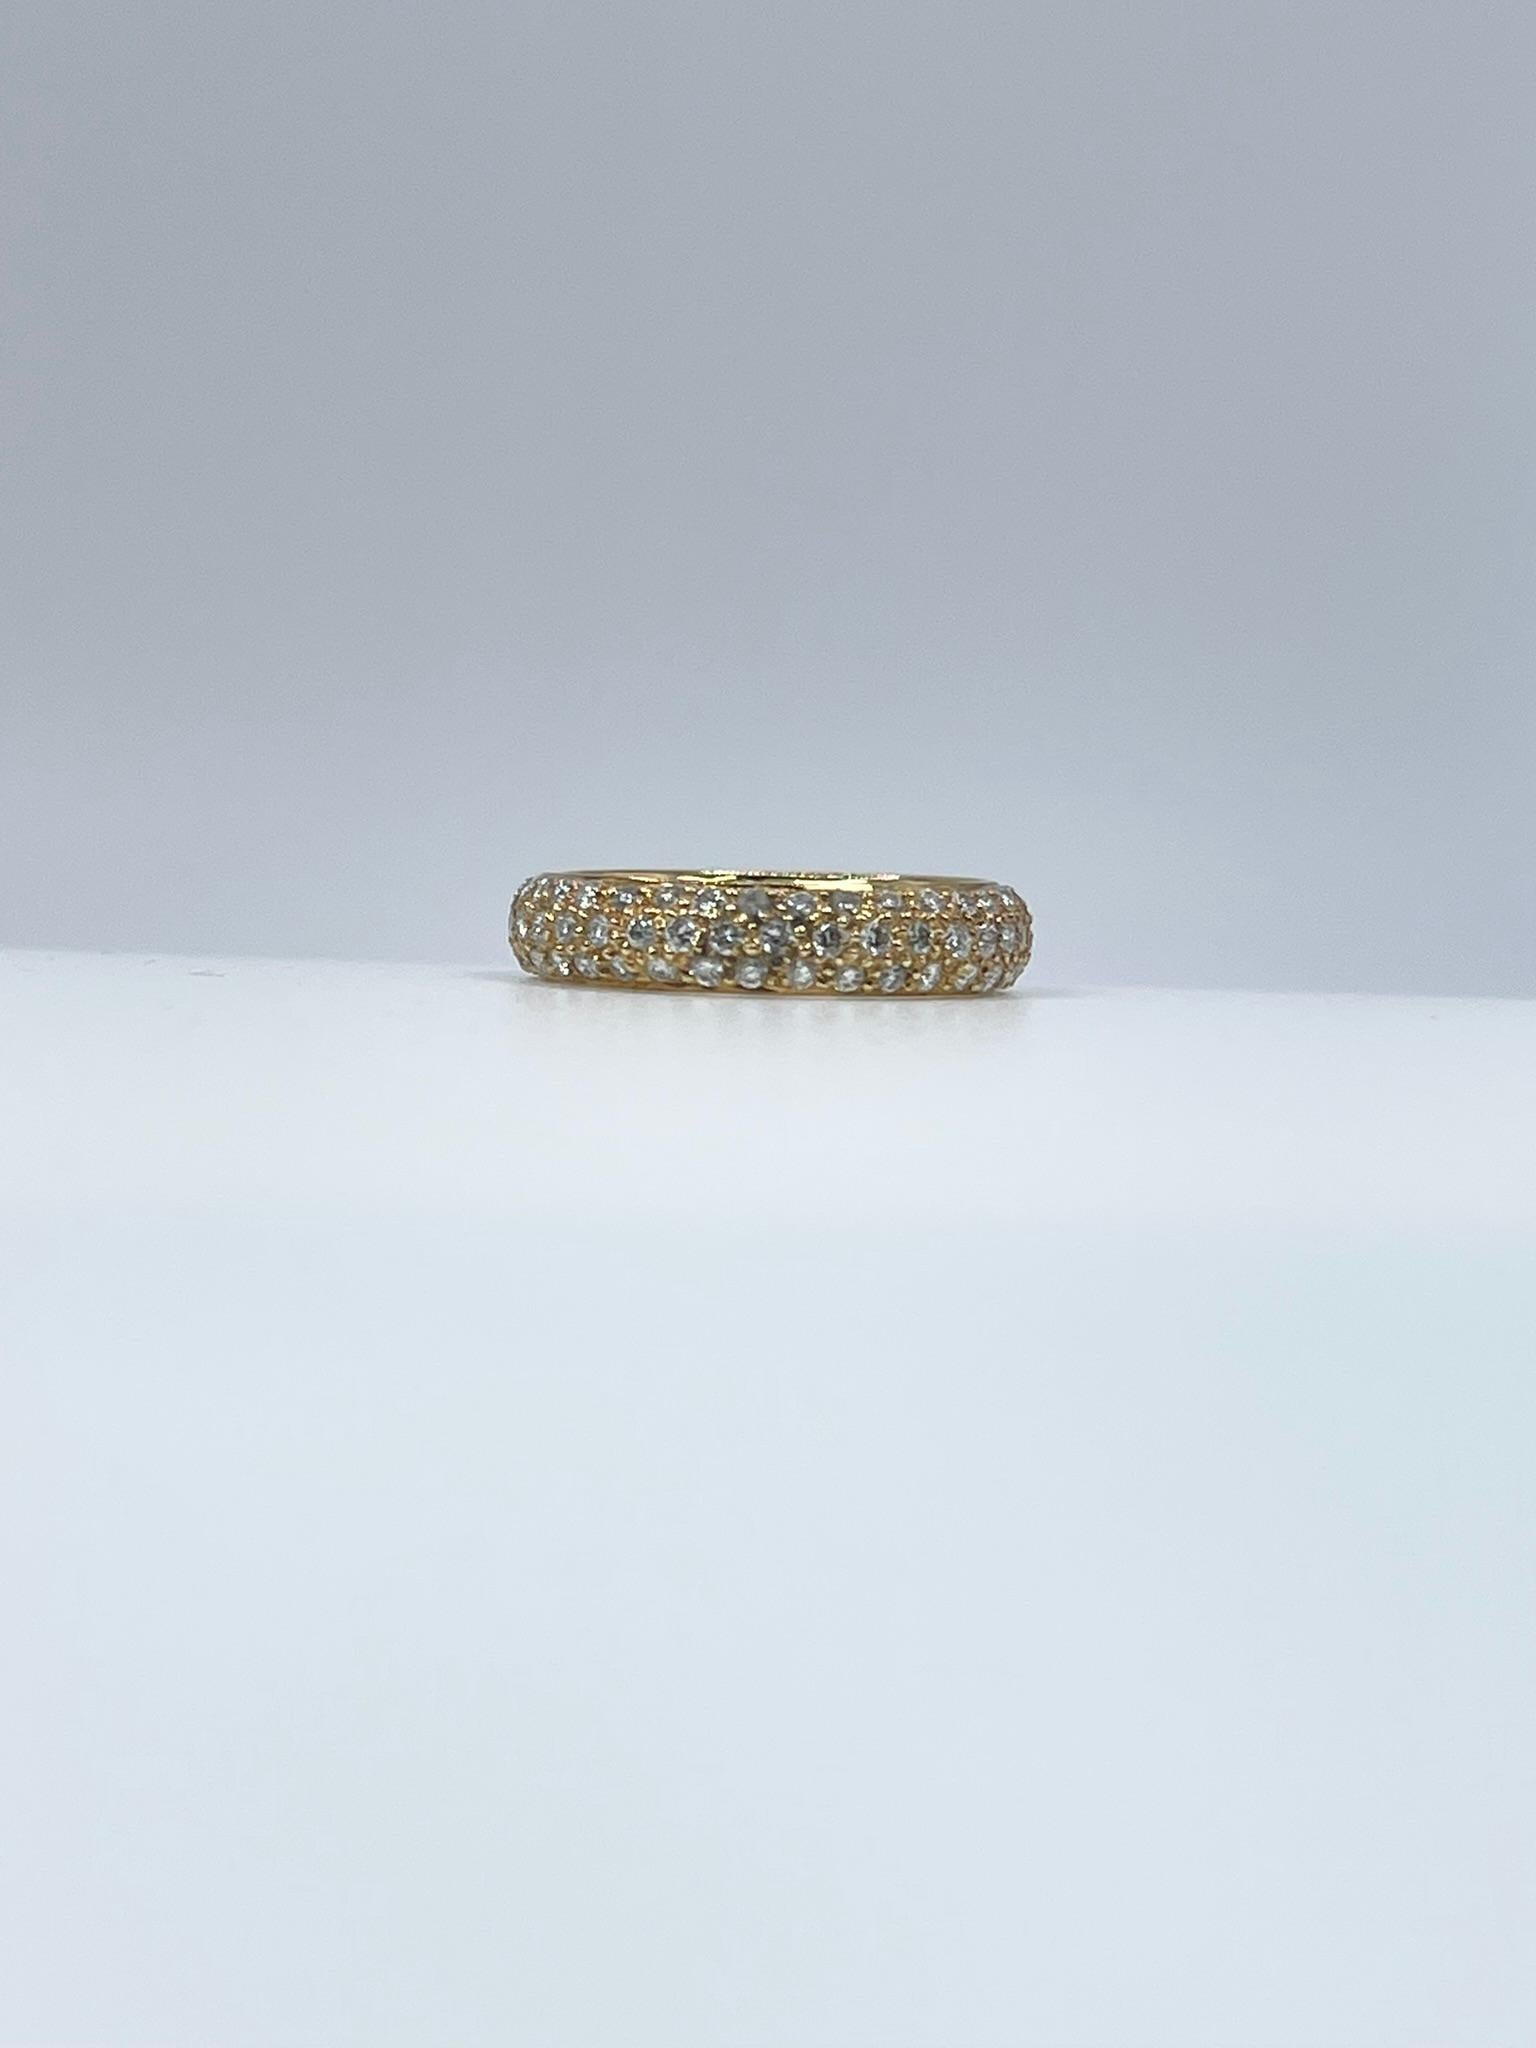 Pave Diamond Ring 18kt Yellow Gold Wedding Band Luxury Pave Diamond Ring Modern For Sale 1